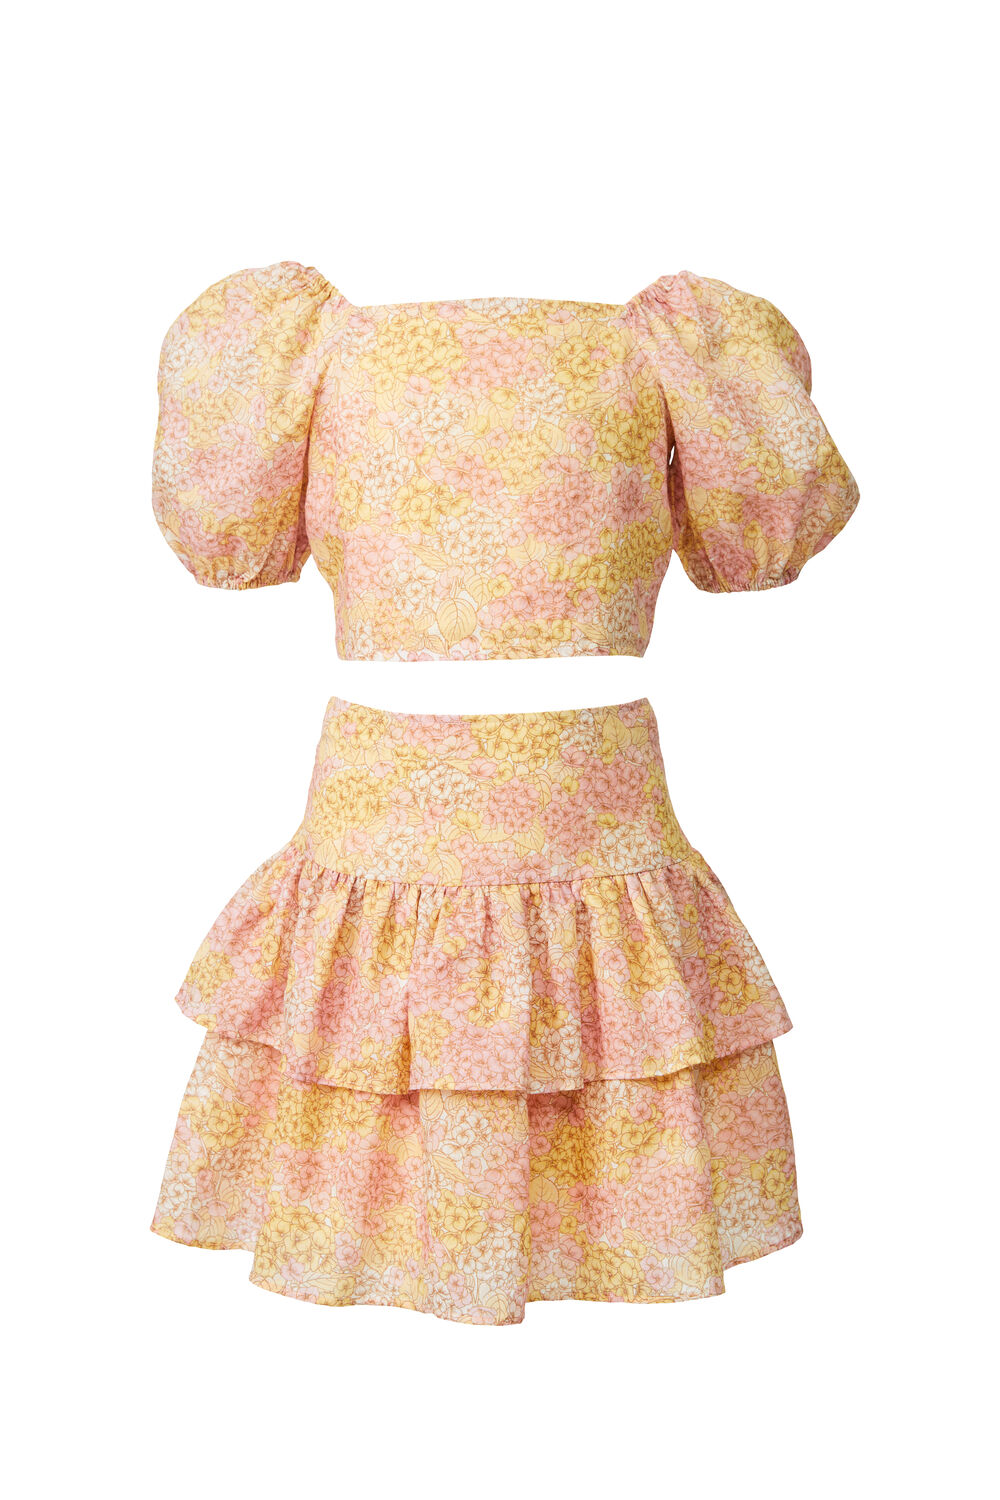 GIRLS AMEILA FLORAL SKIRT in colour EL N YELLOW